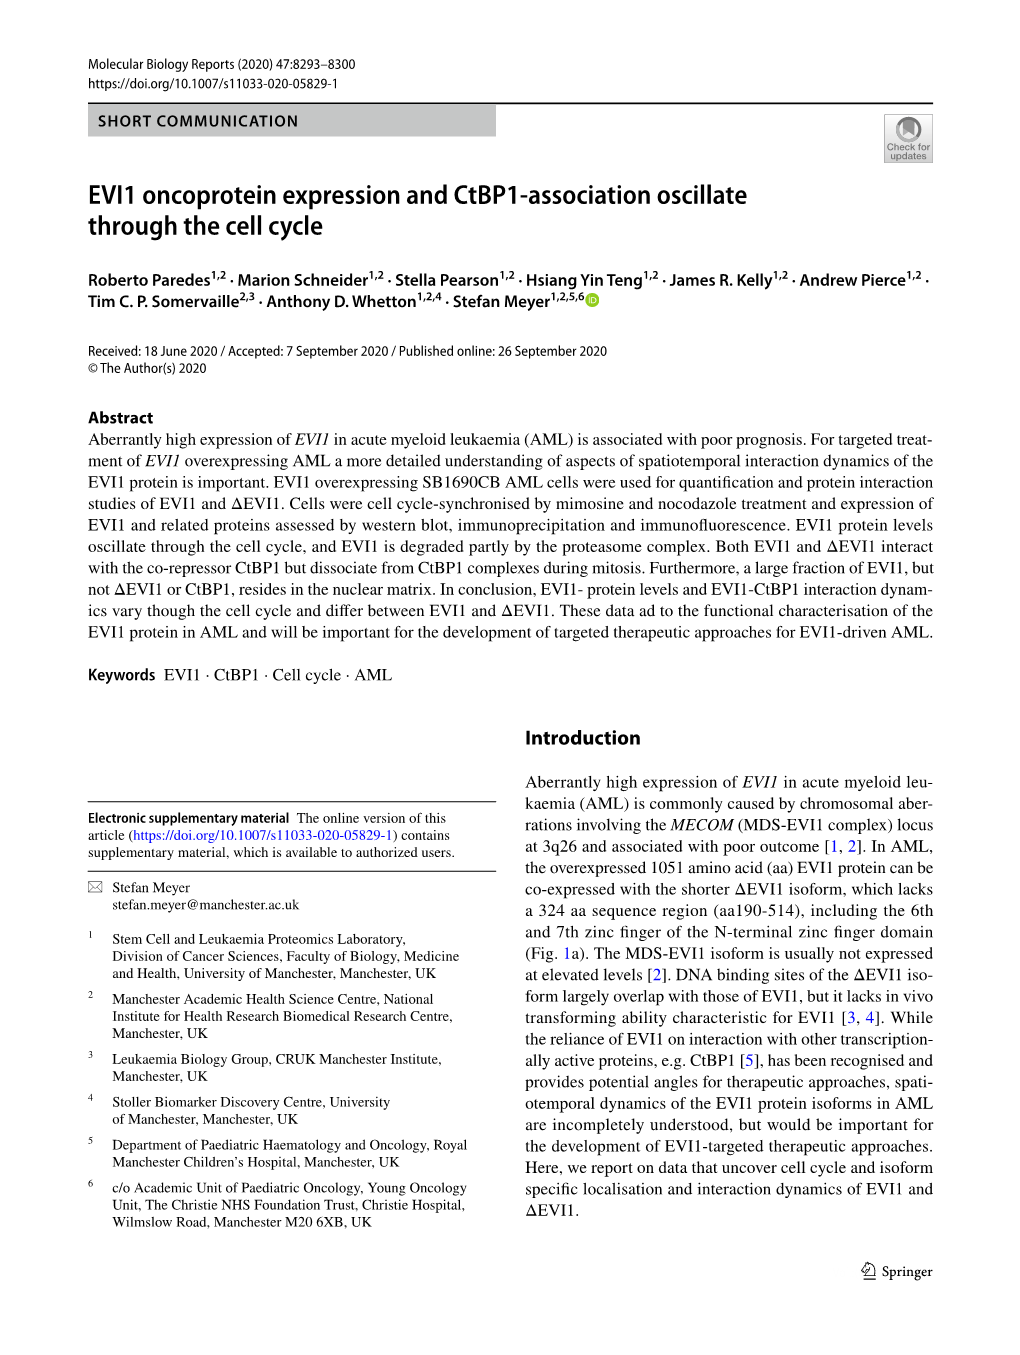 EVI1 Oncoprotein Expression and Ctbp1-Association Oscillate Through the Cell Cycle